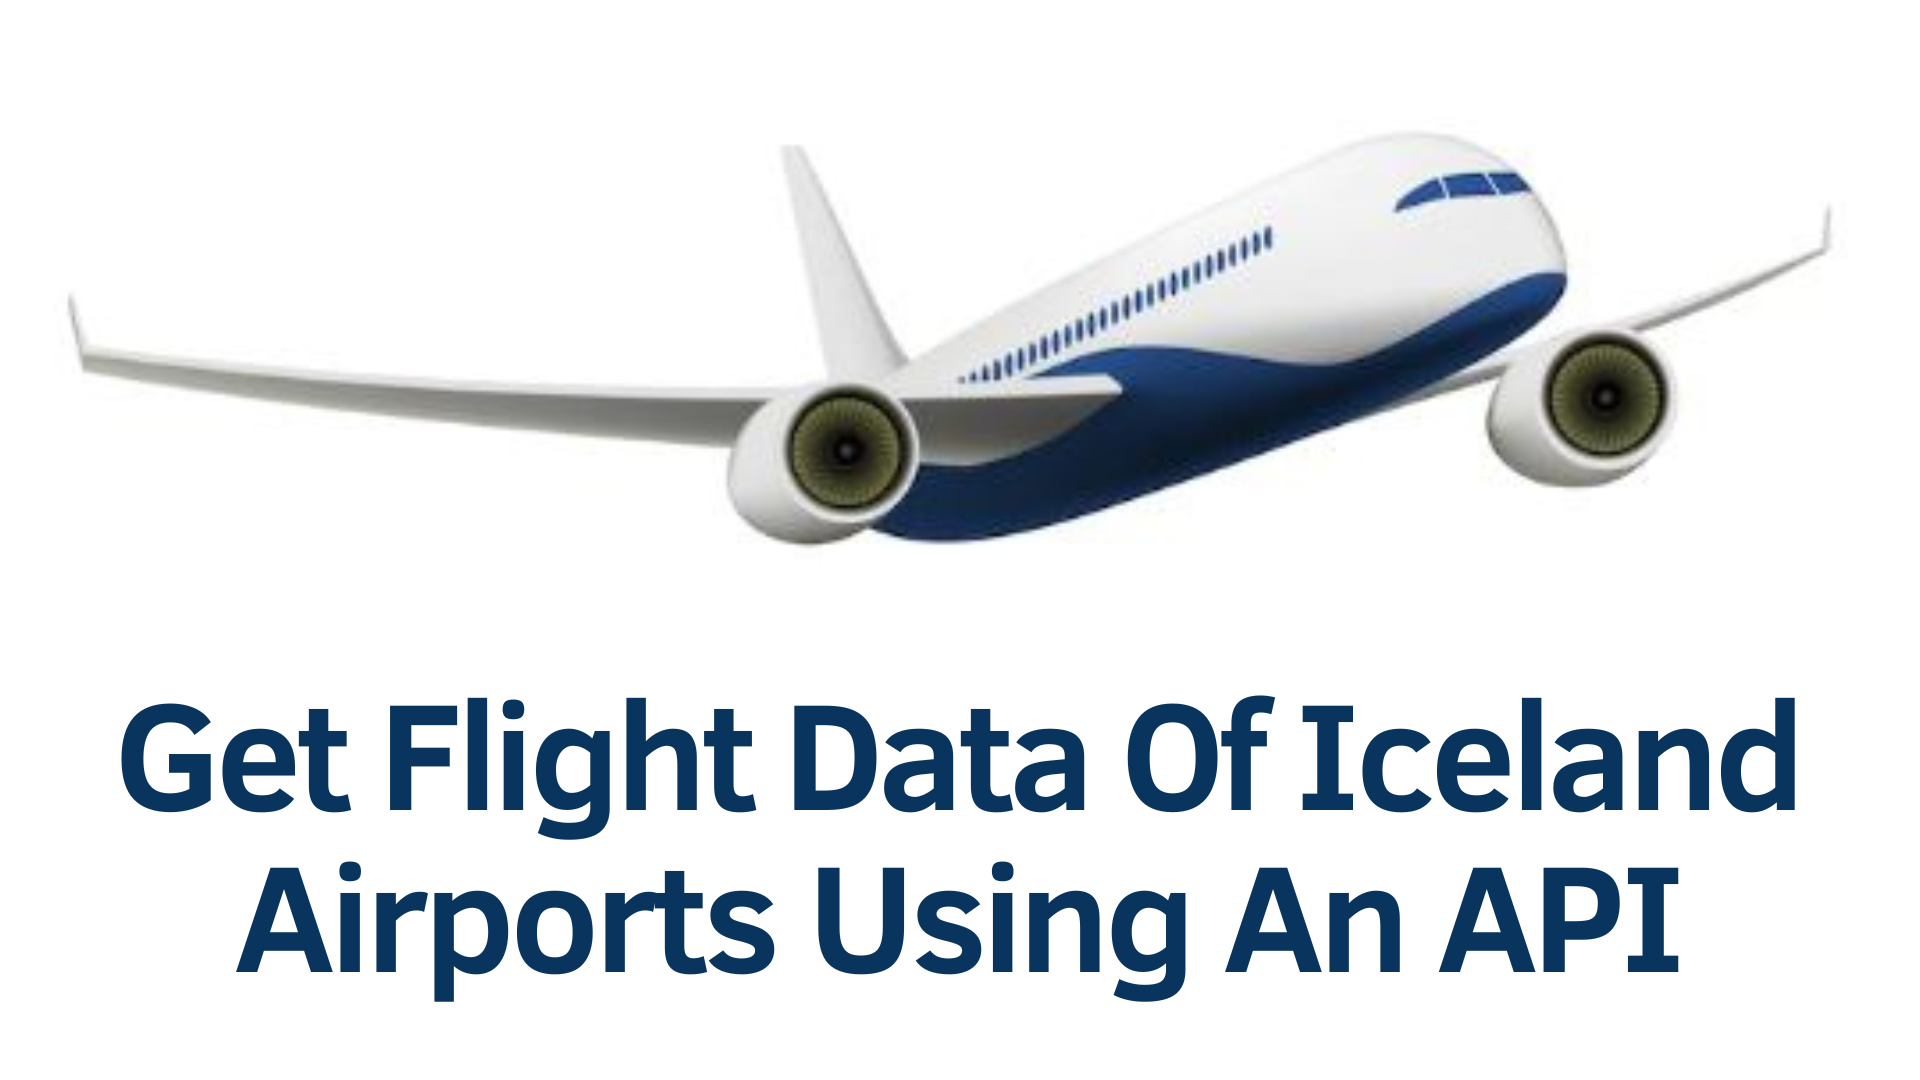 Get Flight Data Of Iceland Airports Using An API